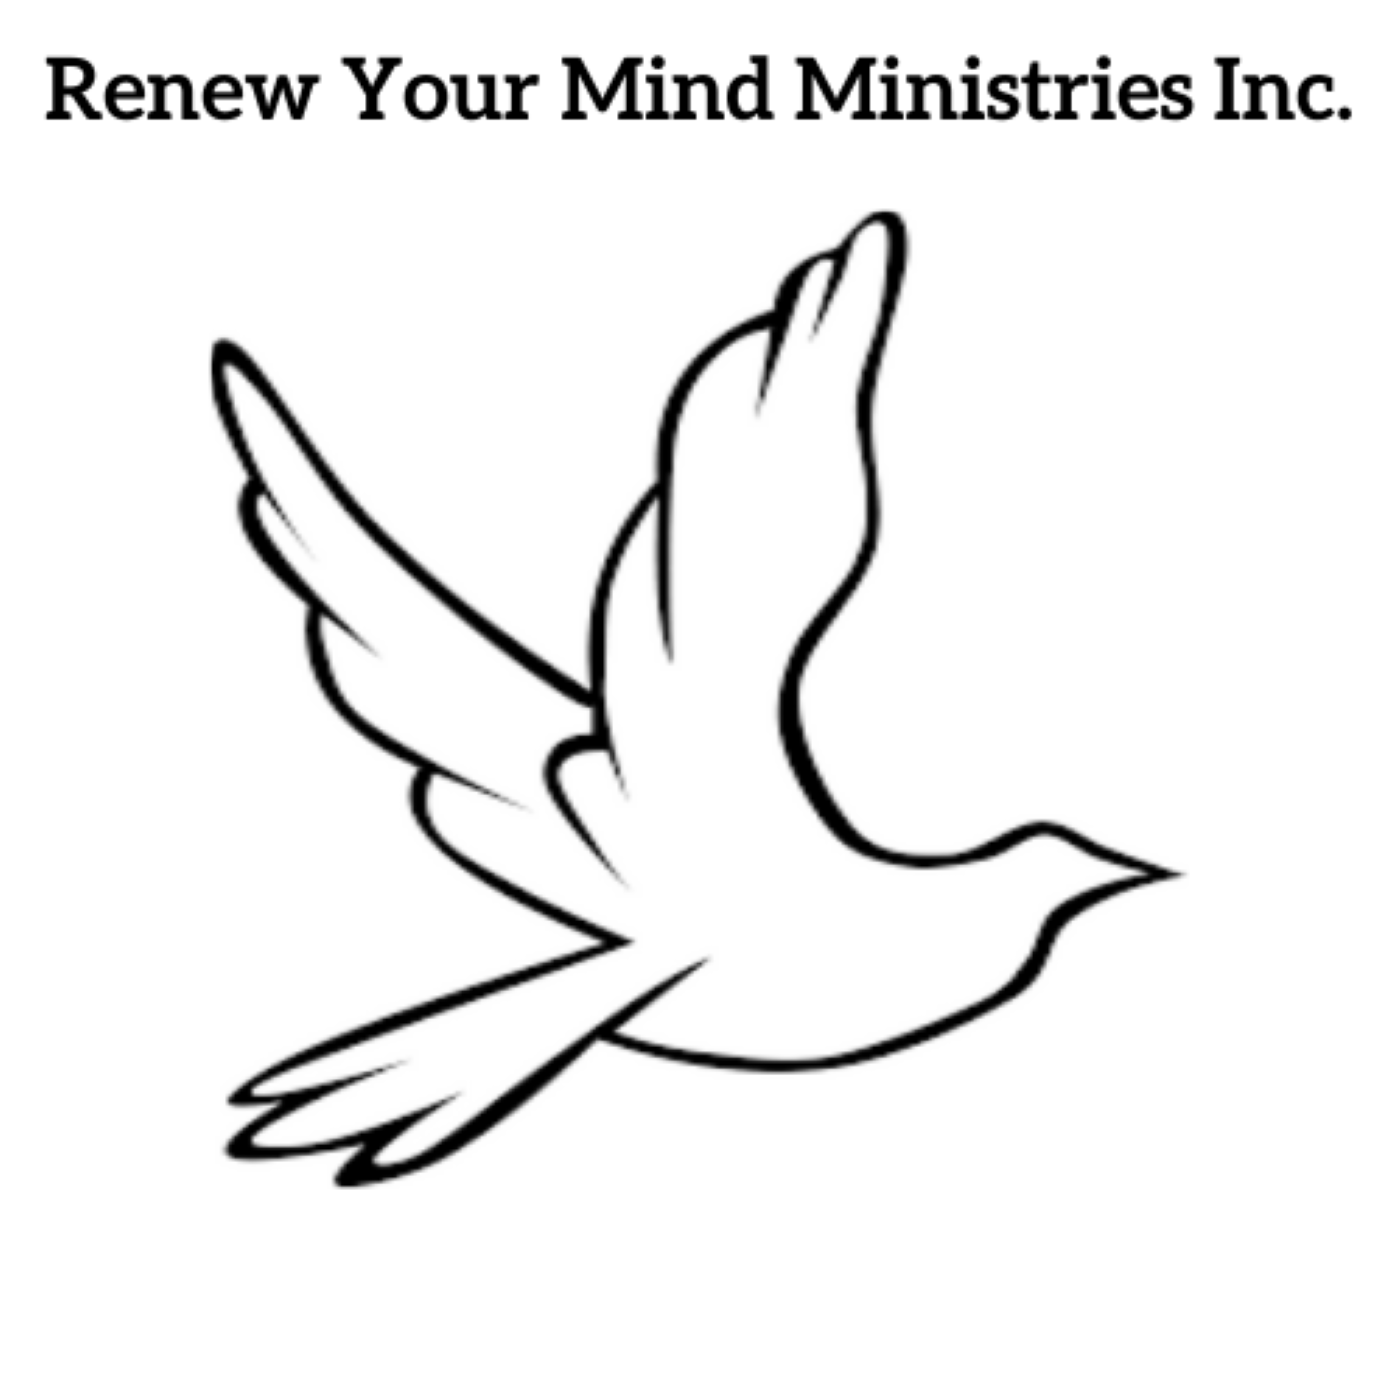 Renewing Your Mind Ministries